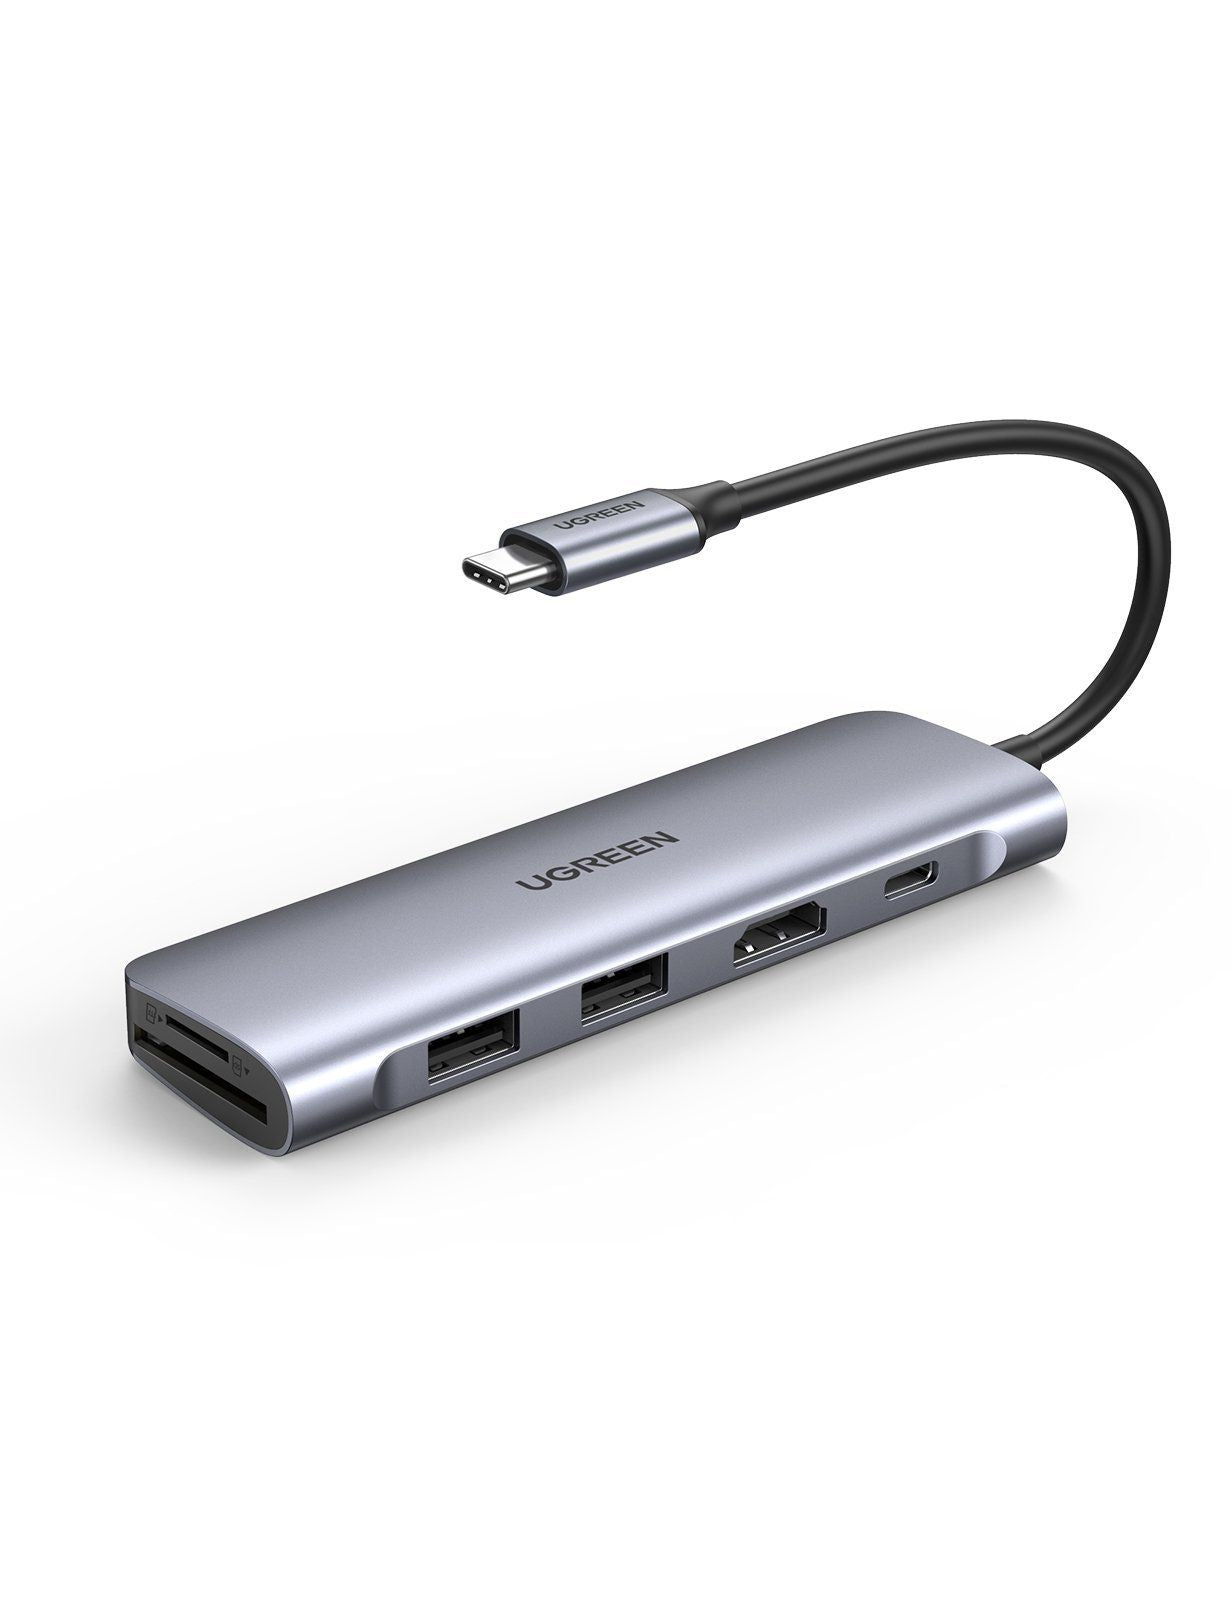 UGreen 6-in-1 USB C PD Adapter with 4K HDMI